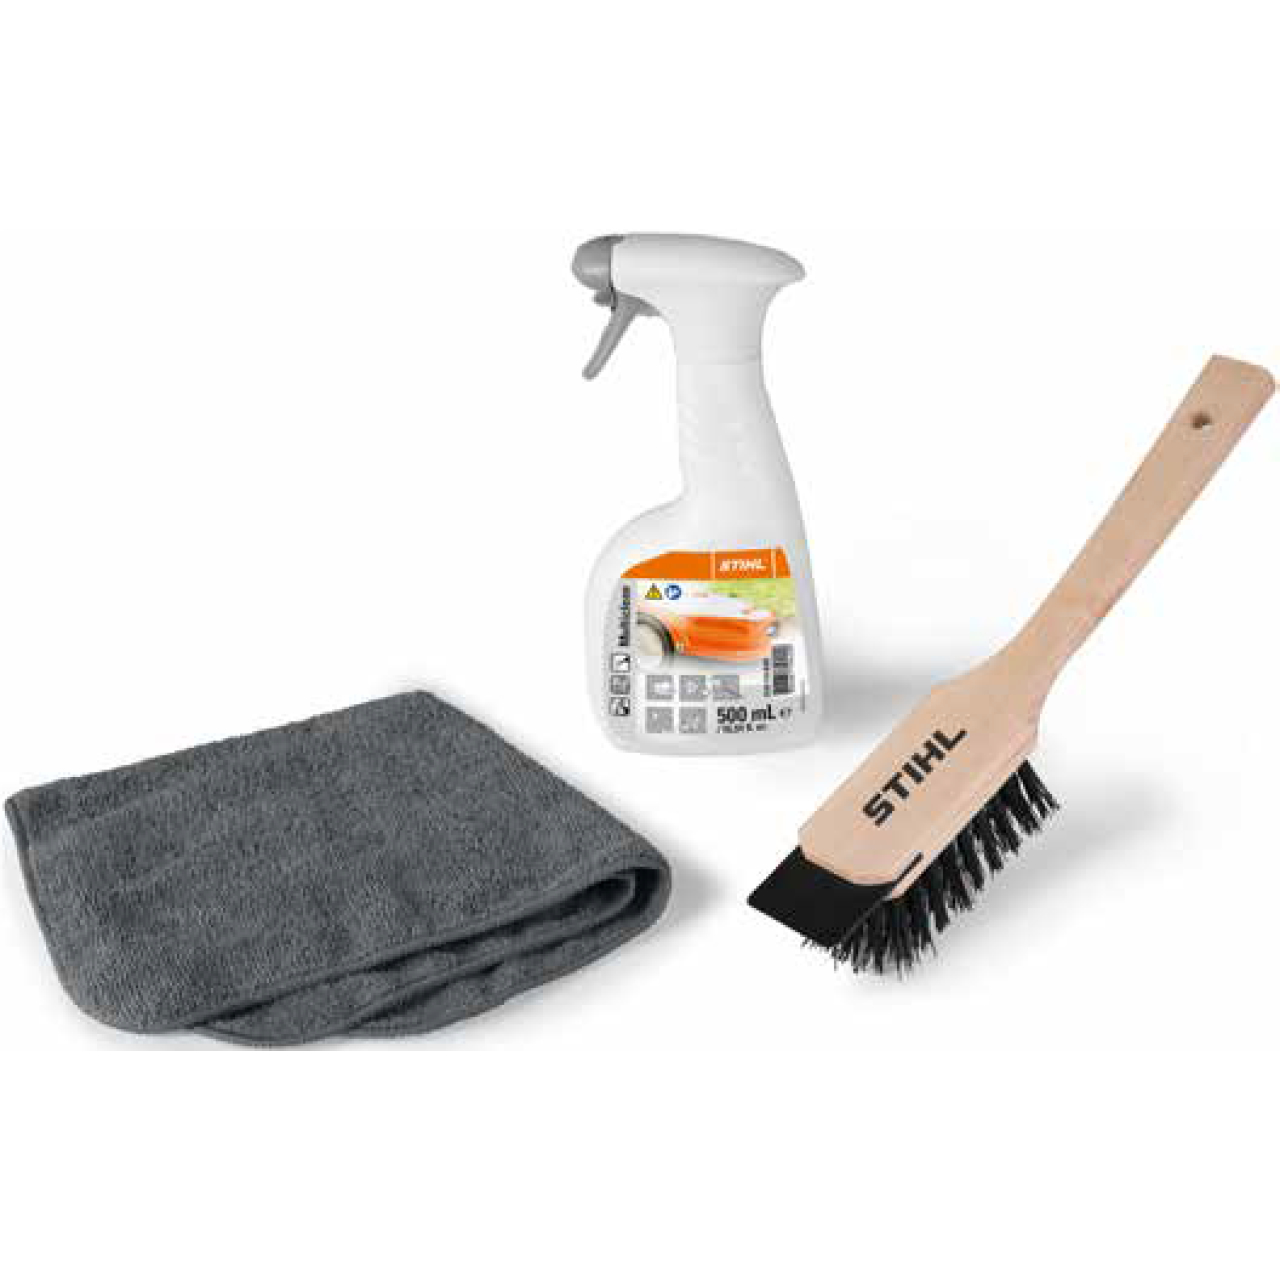 iMOW® Clean & Care Kit